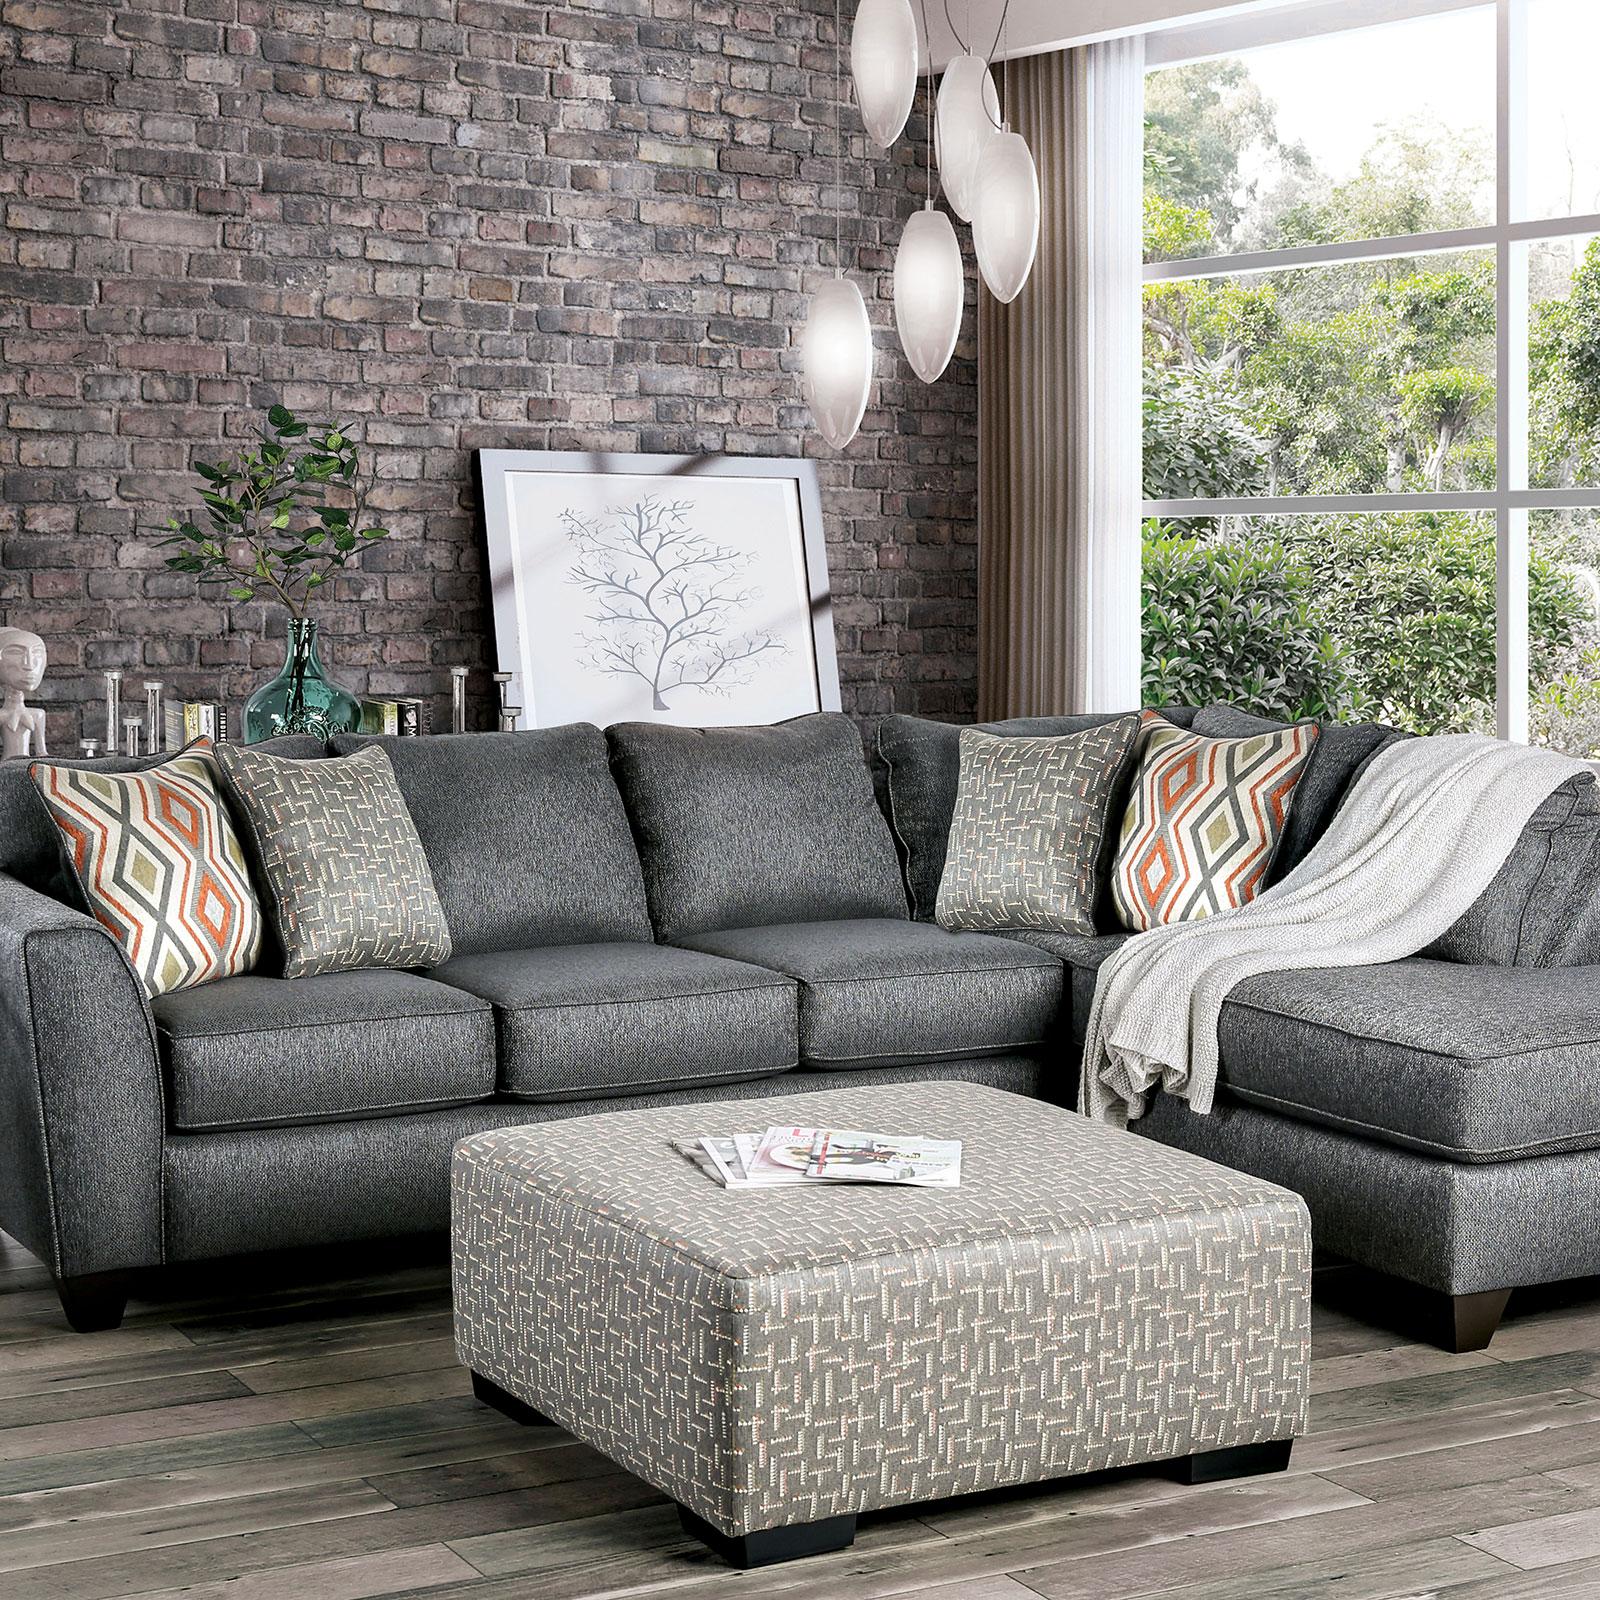 Transitional Sectional Sofa EARL SM5152 SM5152 in Gray Chenille